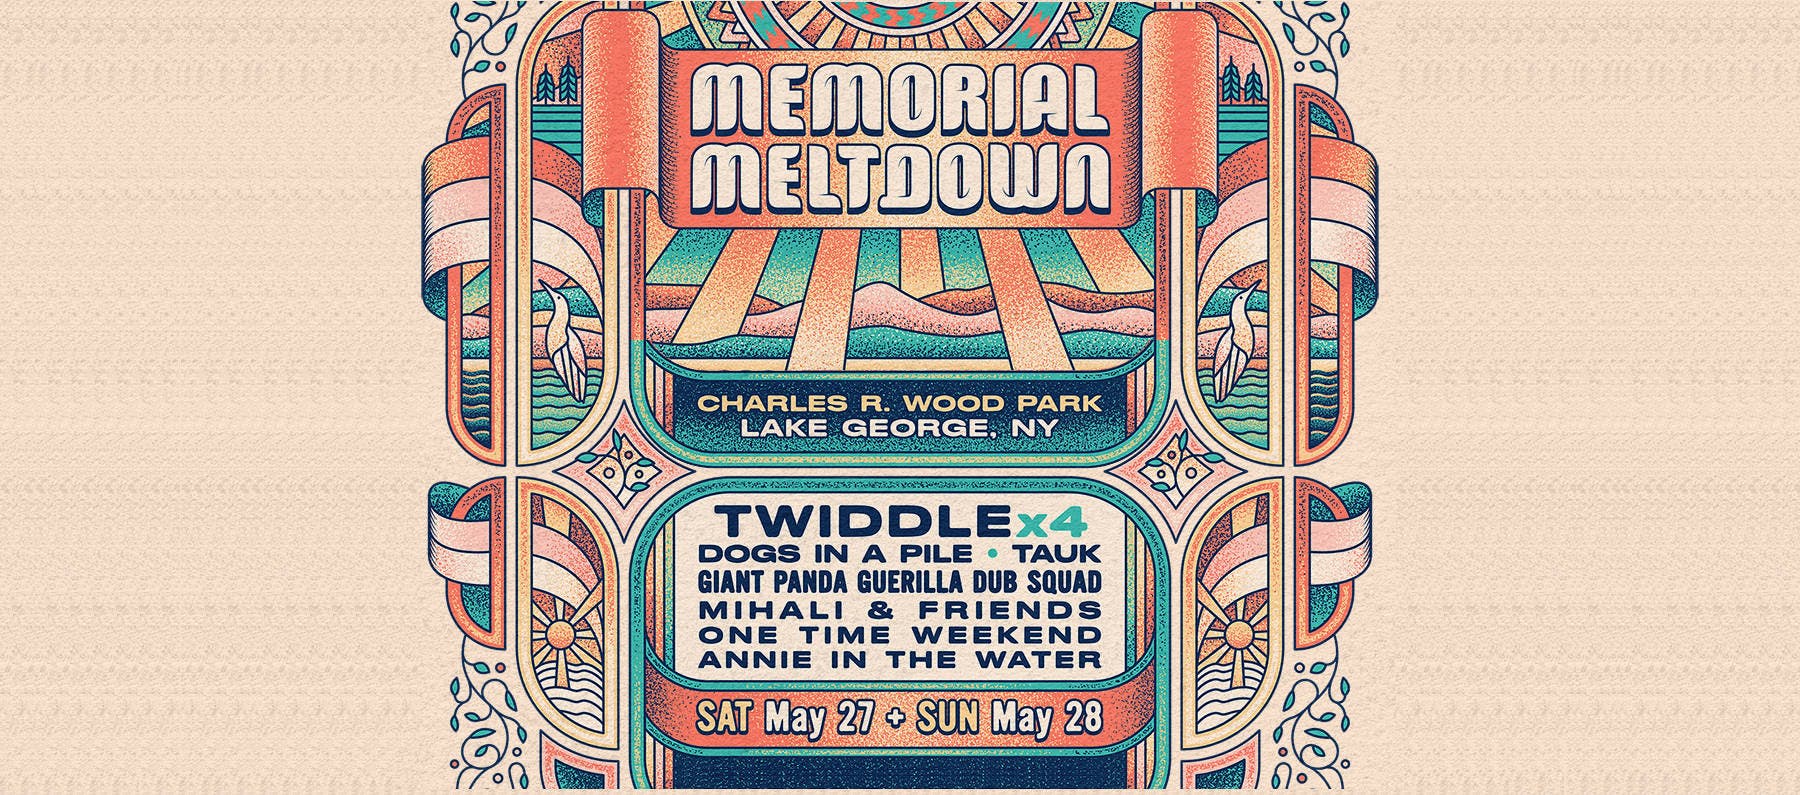 Twiddle & Frends Memorial Meltdown The Ticketing Co.